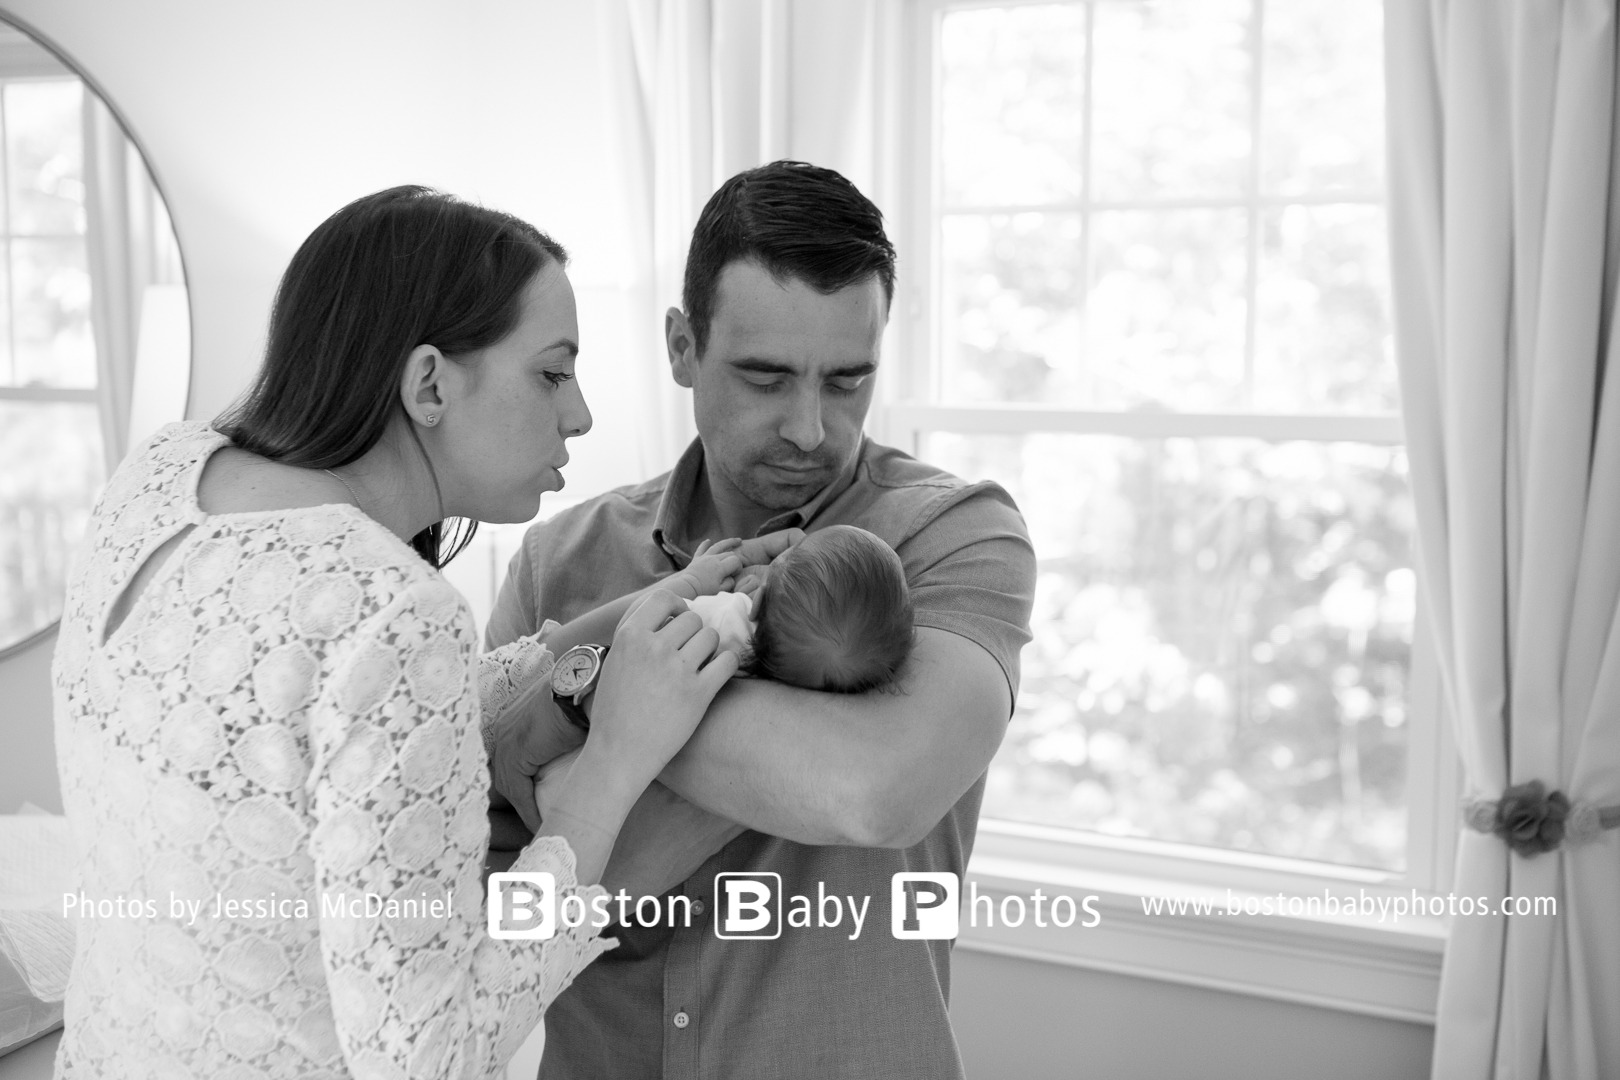 Medfield, MA: Nearly four week old photoshoot